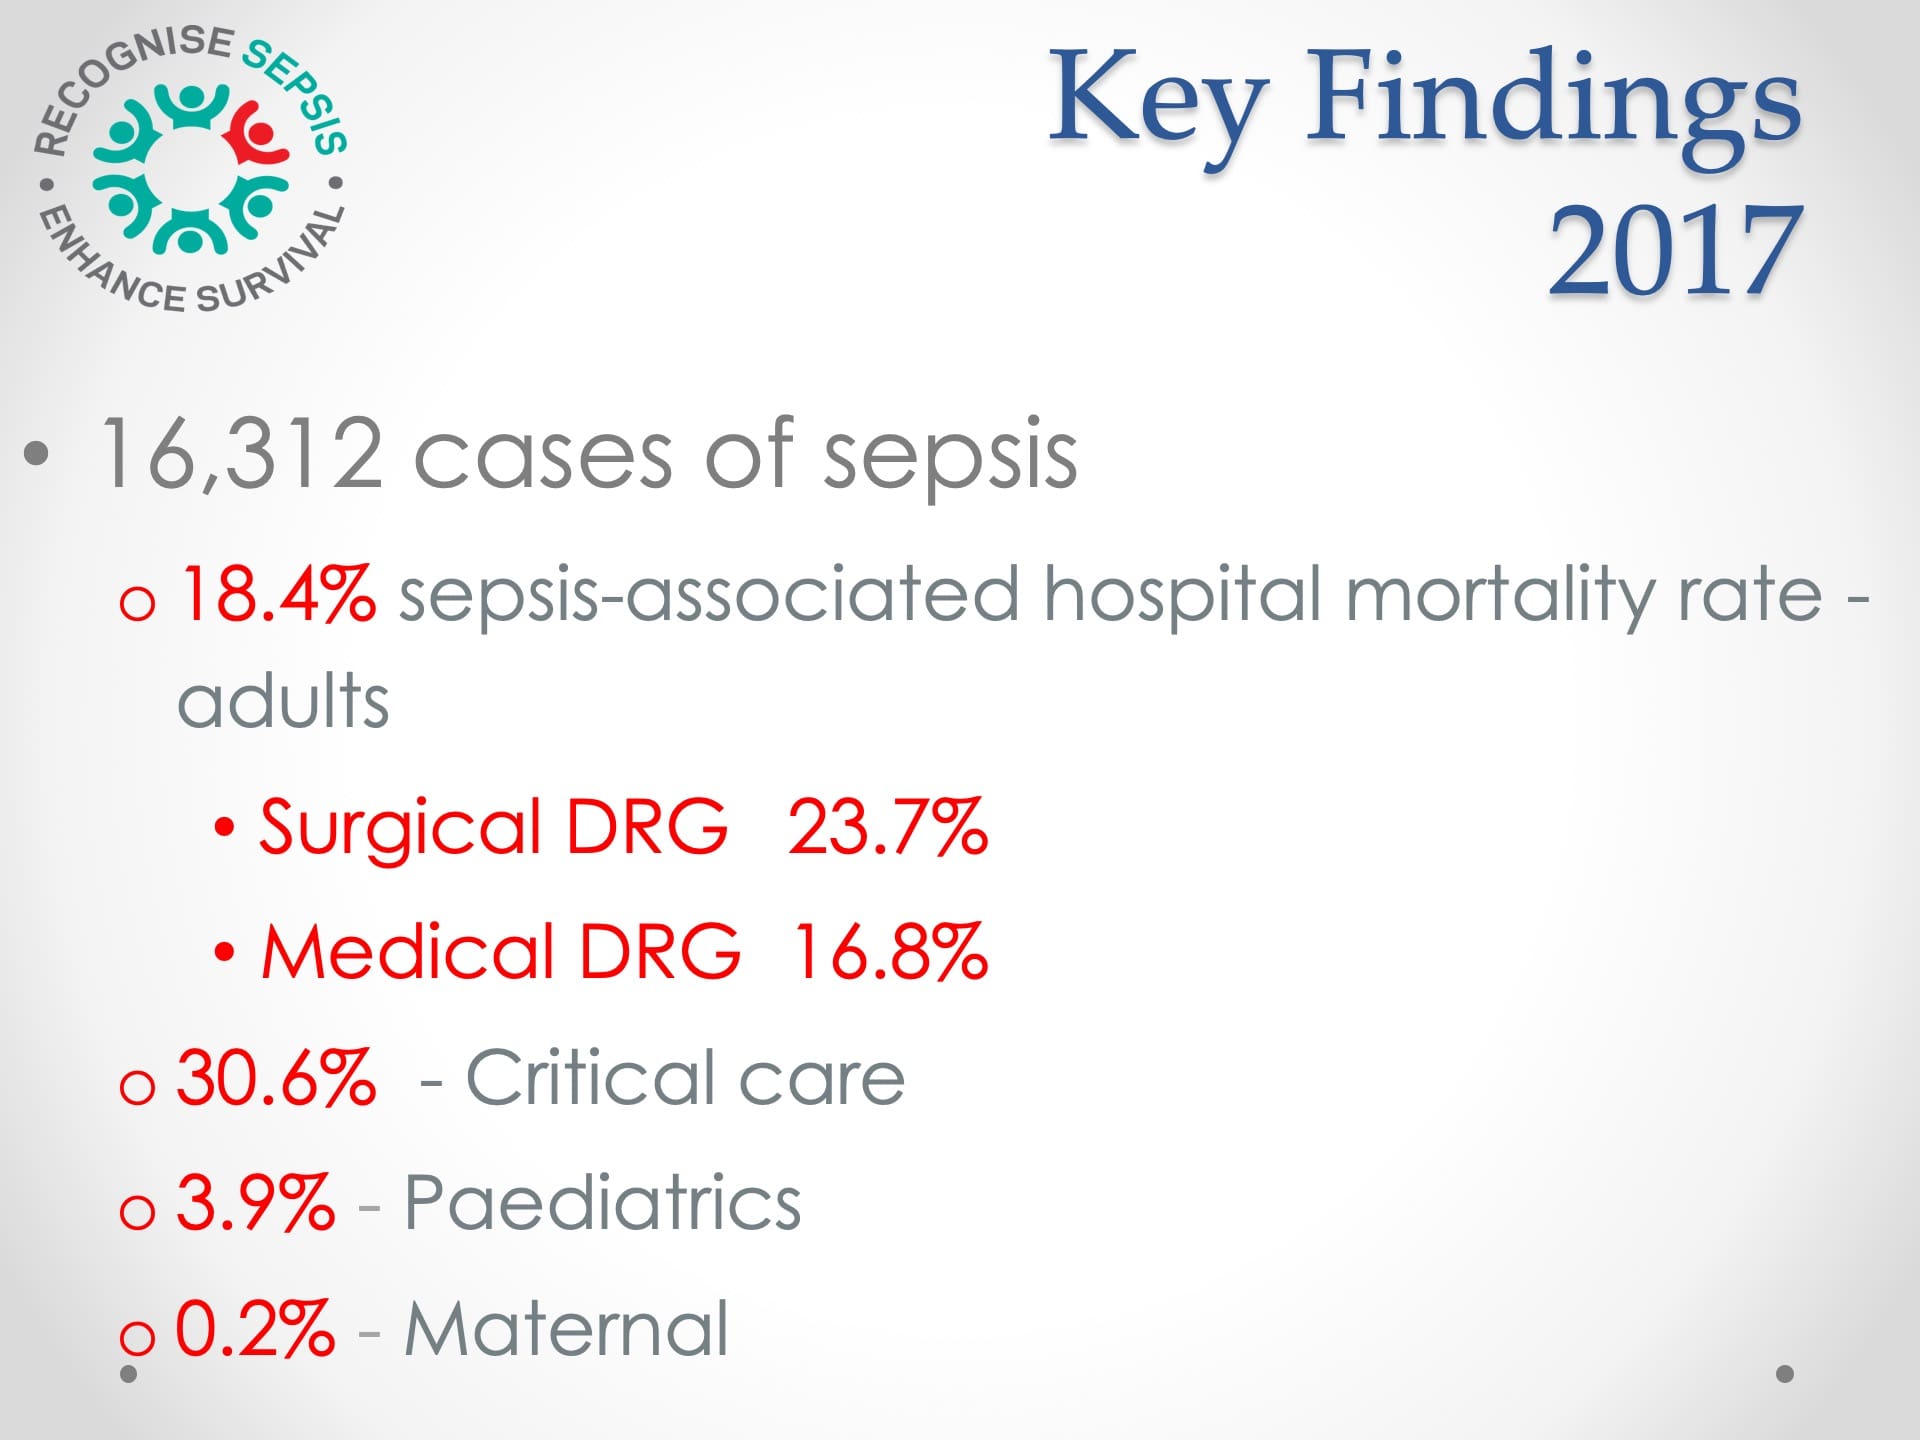 The National Sepsis Plan in Ireland12.jpeg